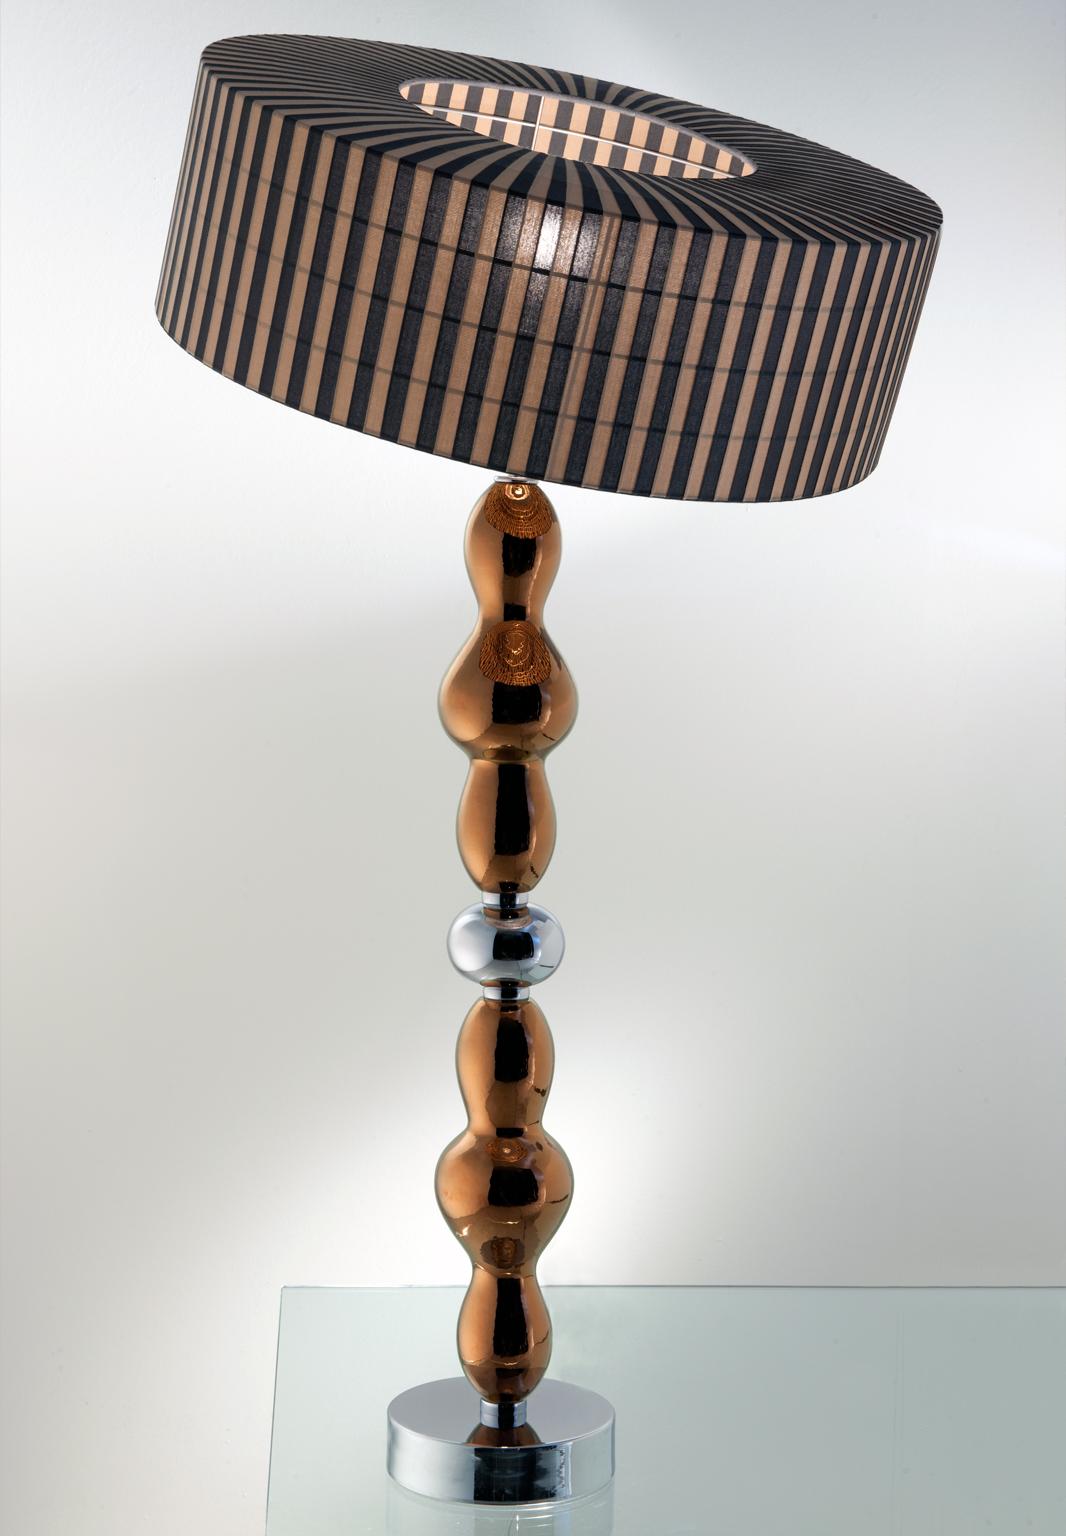 Modern 21st Century Ginger and Fred Copper Ceramic Table Lamp by Patrizia Garganti For Sale